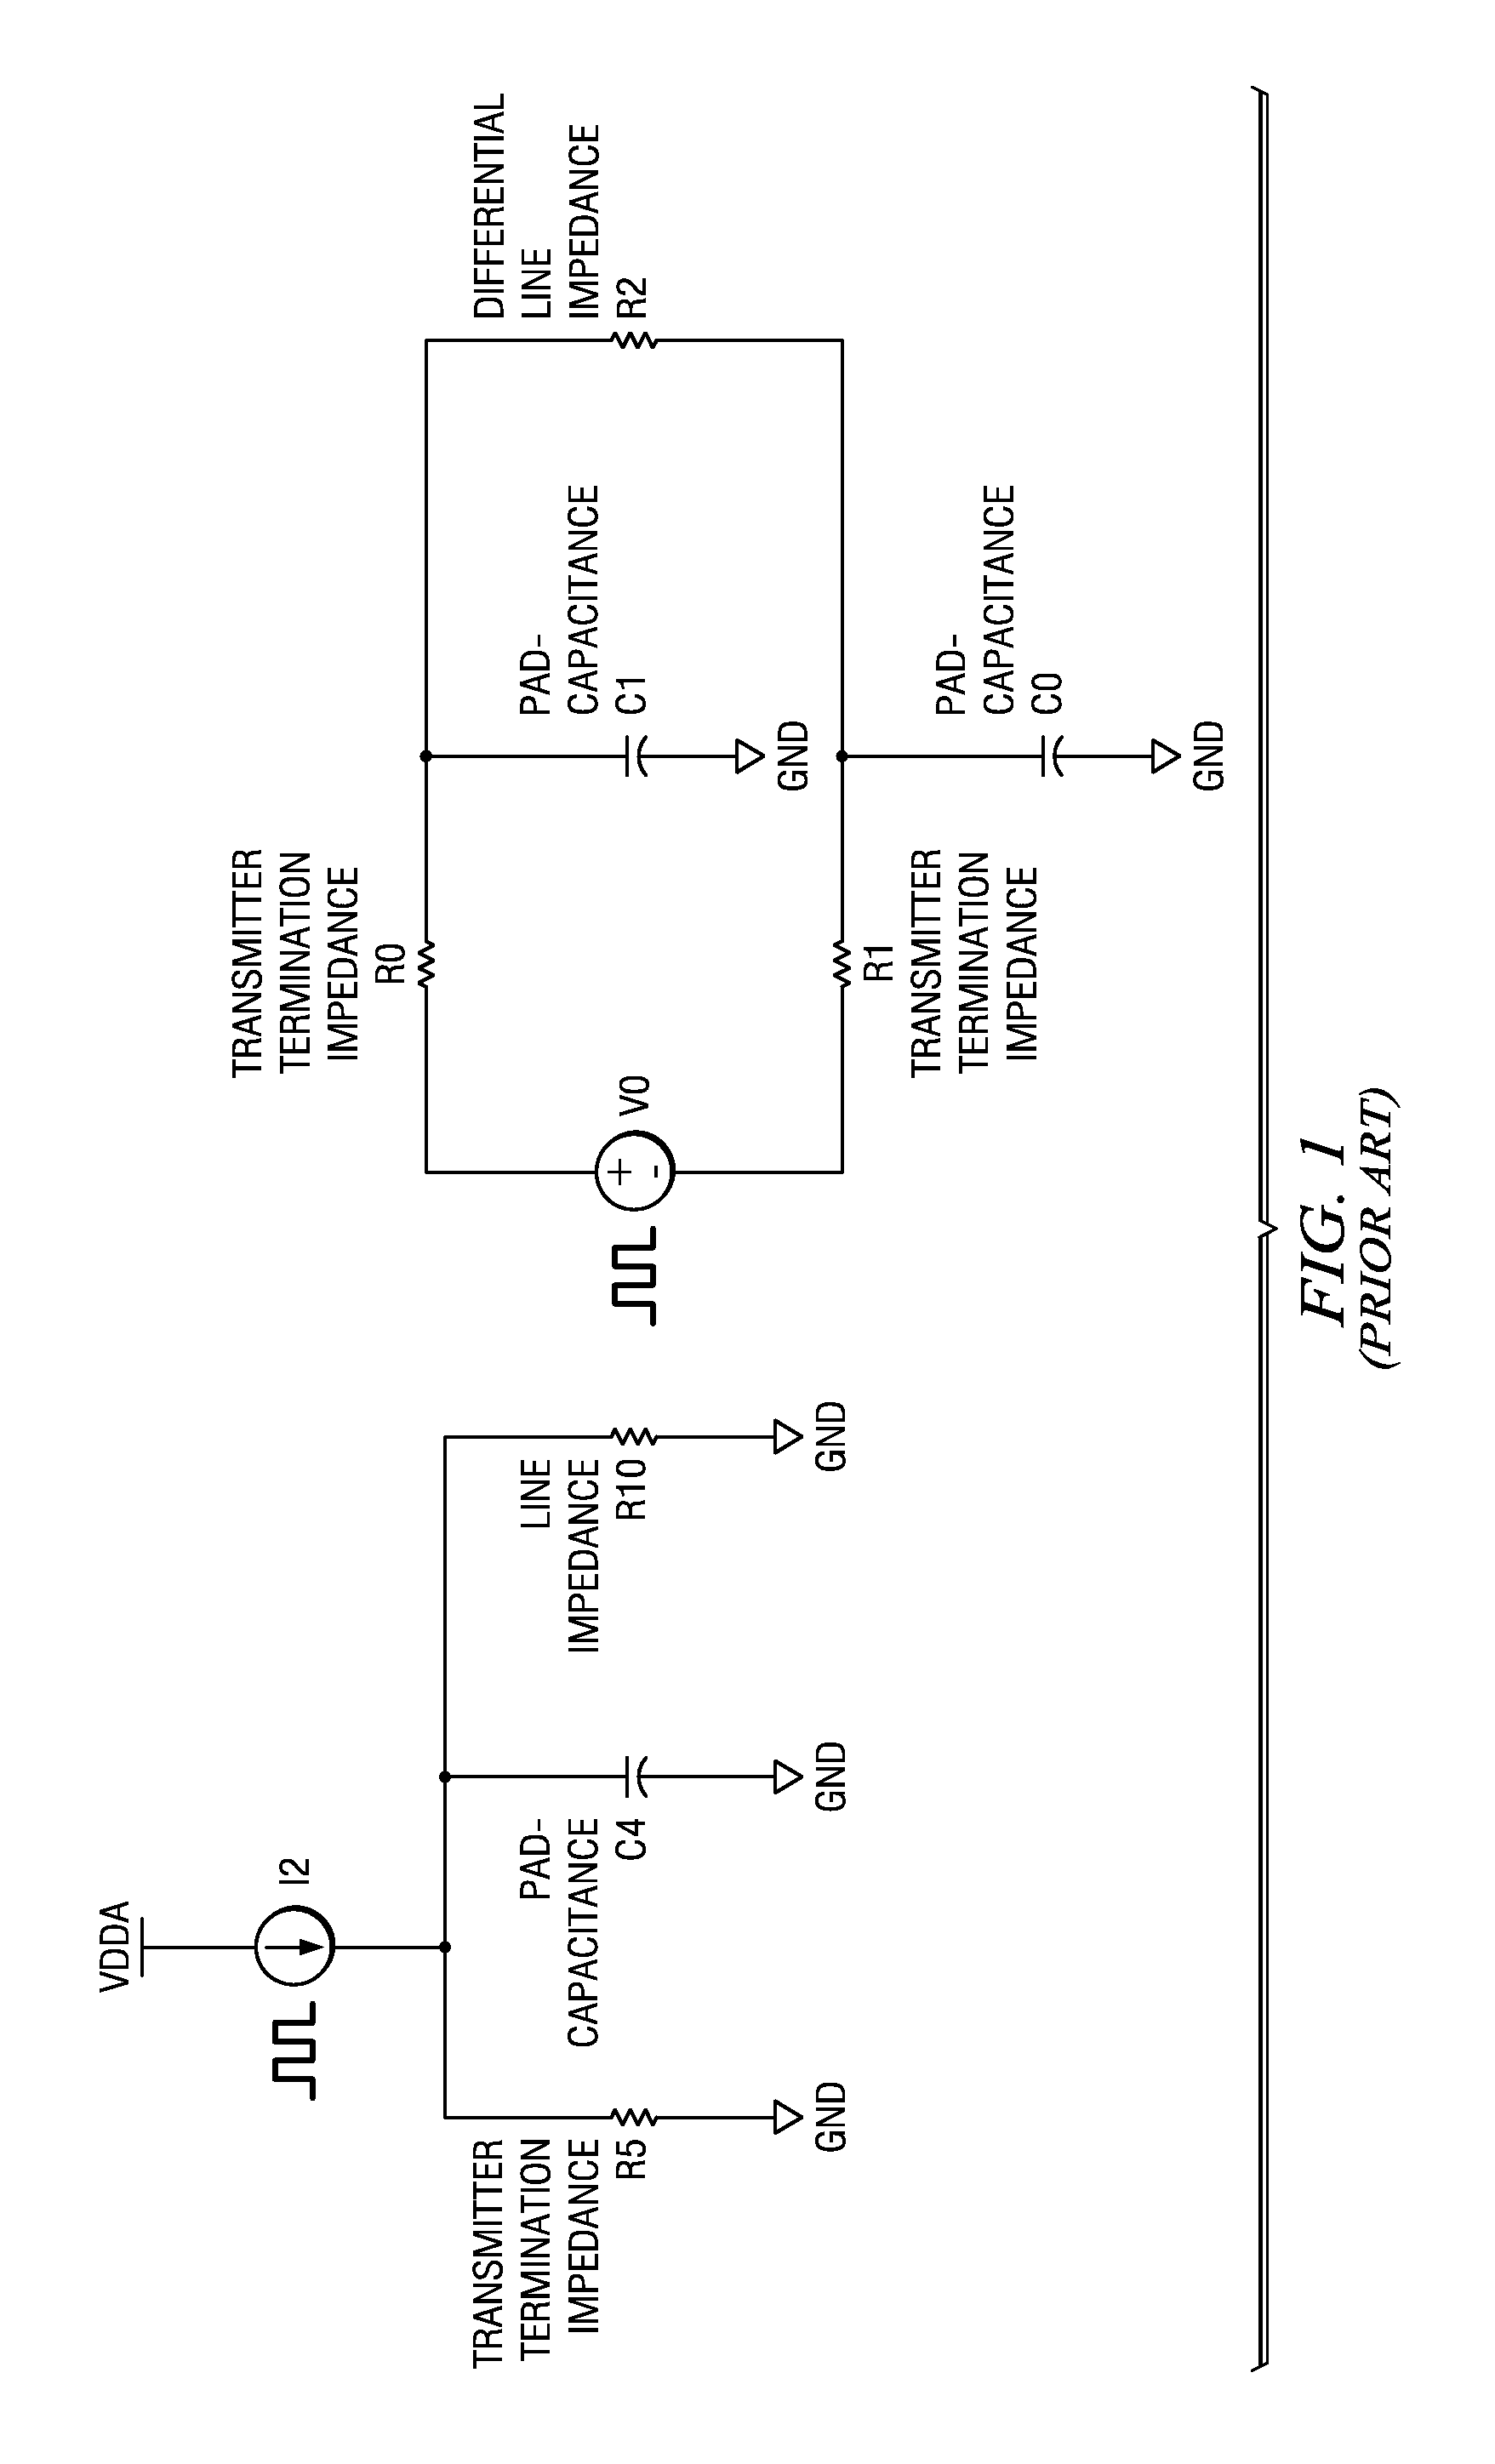 Scheme for controlling rise-fall times in signal transitions